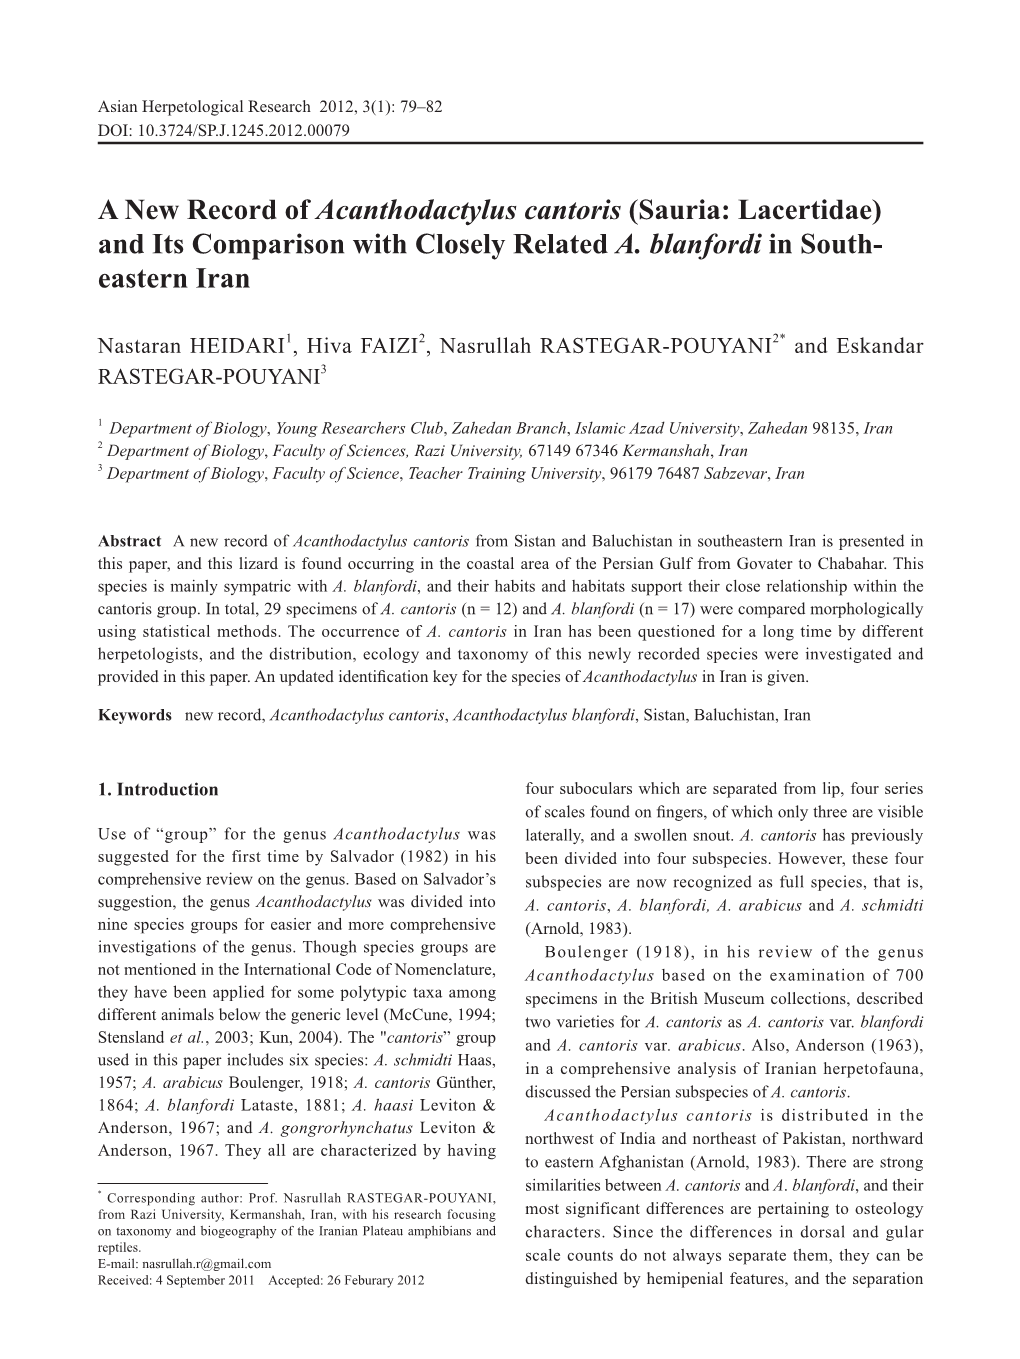 A New Record of Acanthodactylus Cantoris (Sauria: Lacertidae) and Its Comparison with Closely Related A